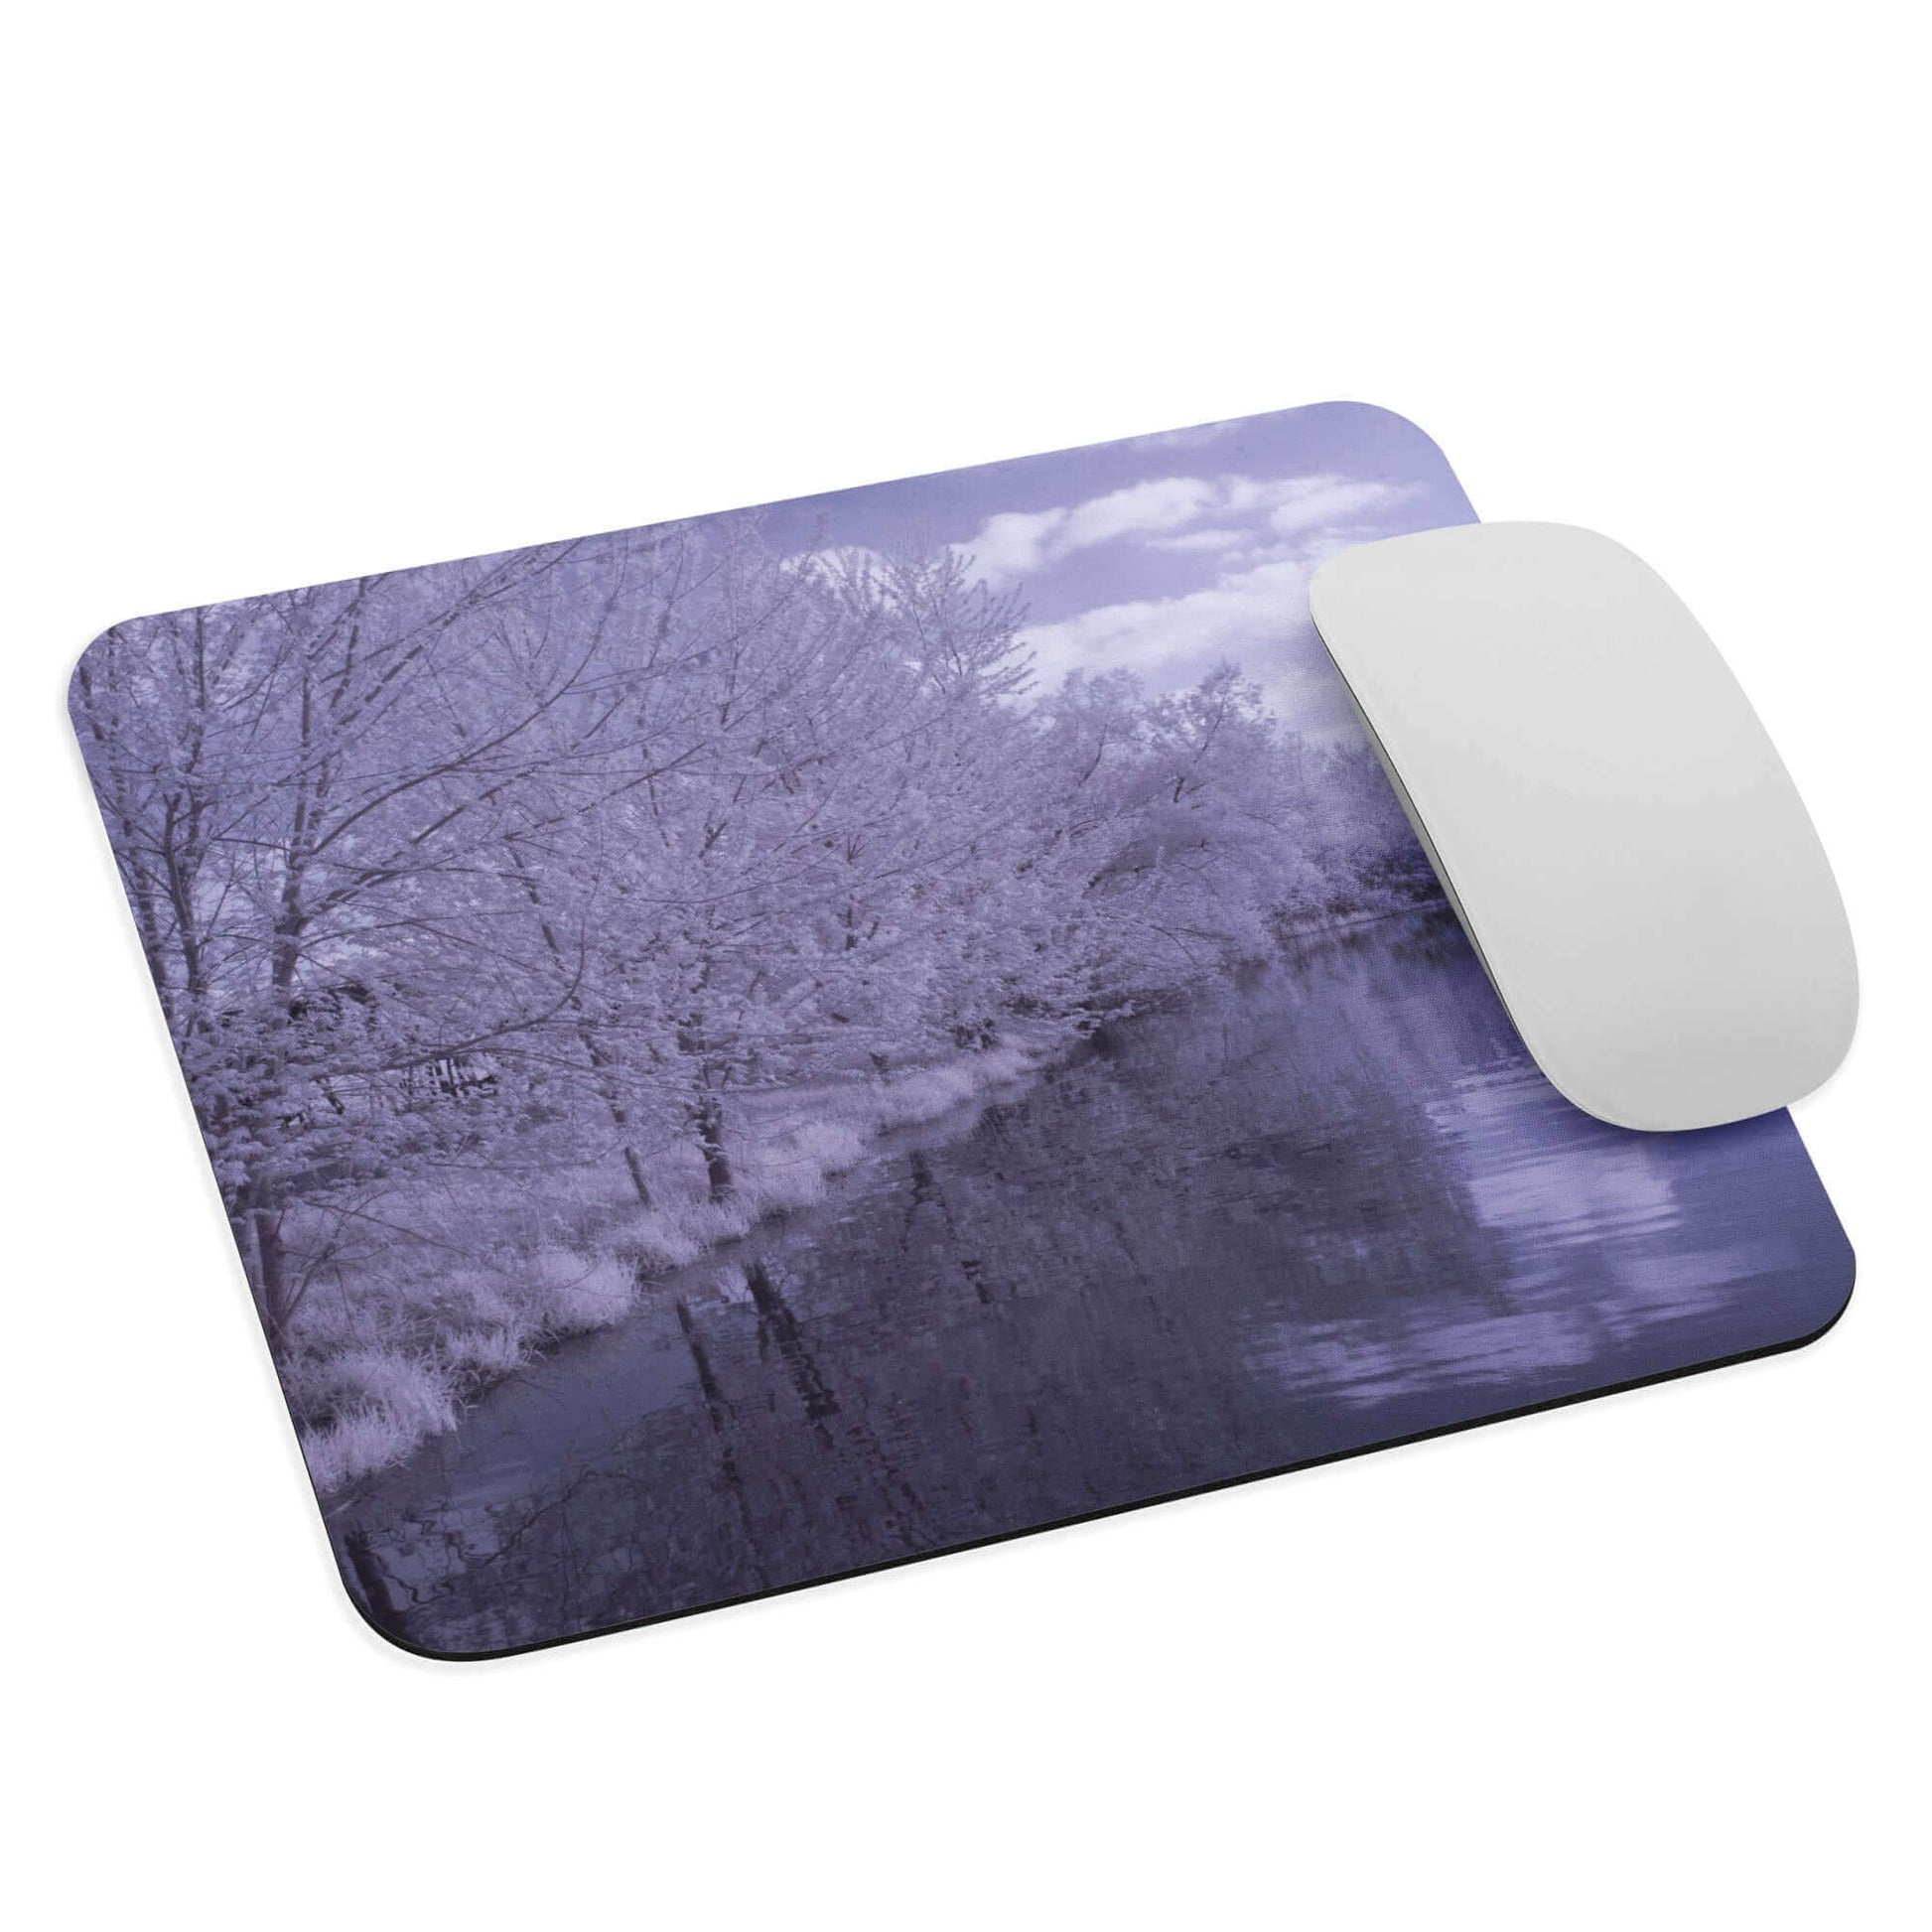 Infrared photo of Lake Julia - Mouse pad - Horrible Designs